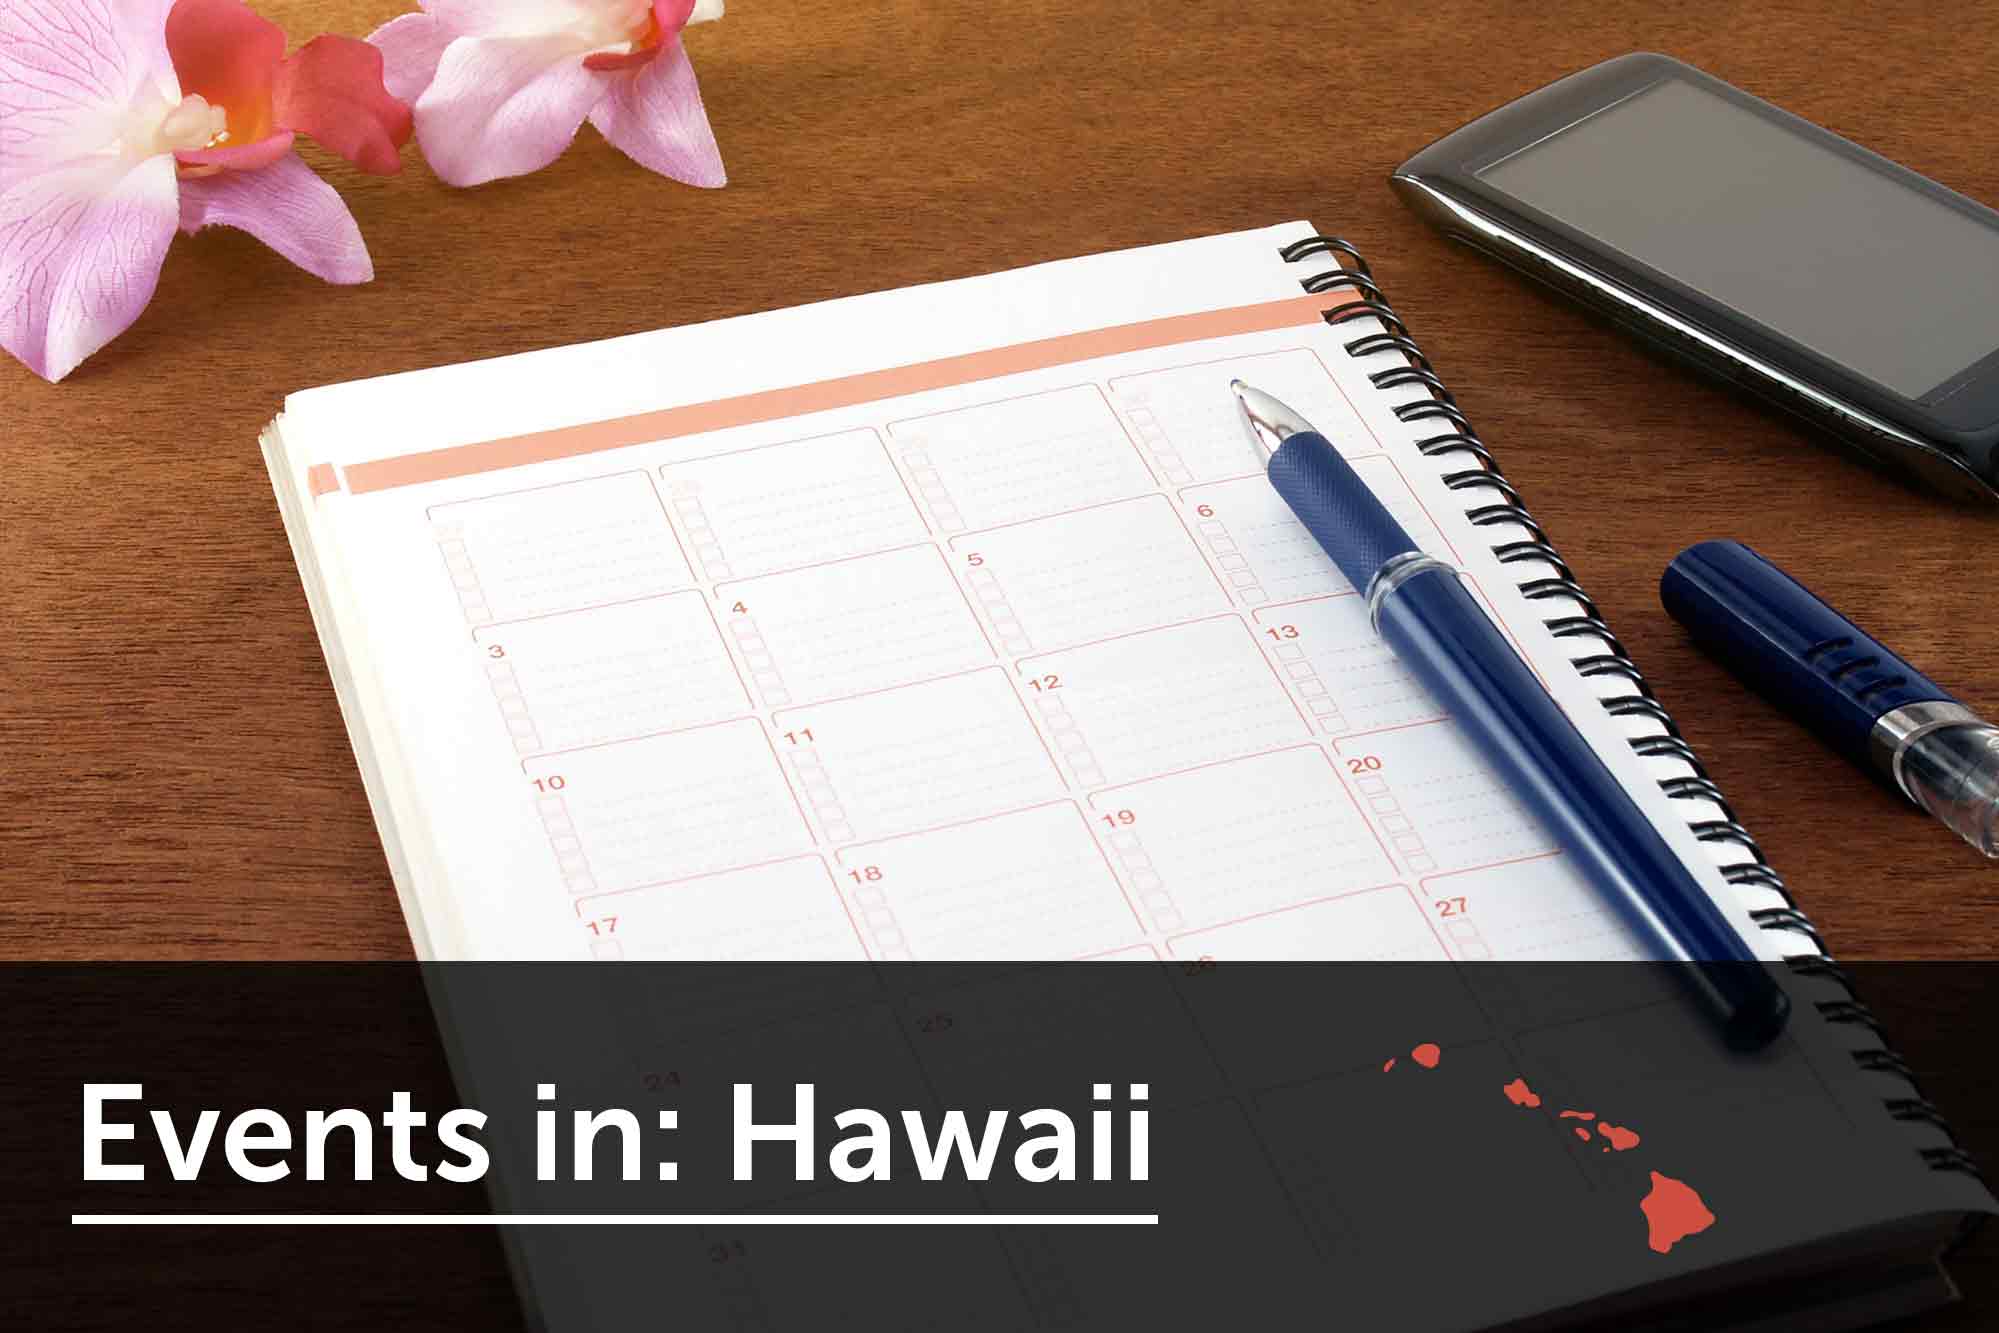 Women's business events in Hawaii